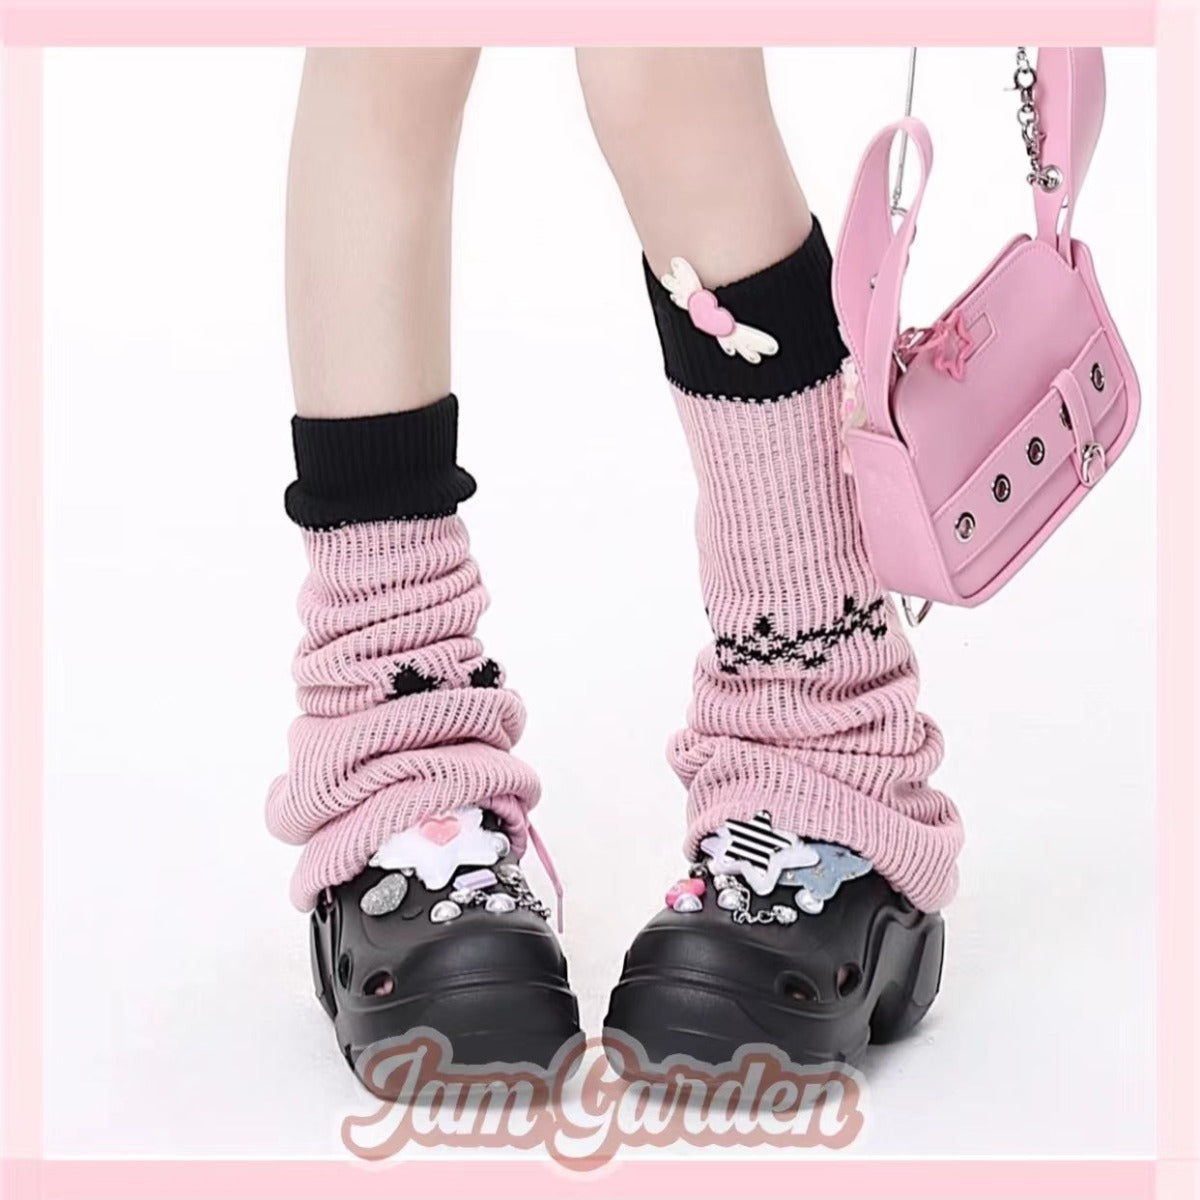 Japanese Cross Subculture Y2K Style Socks